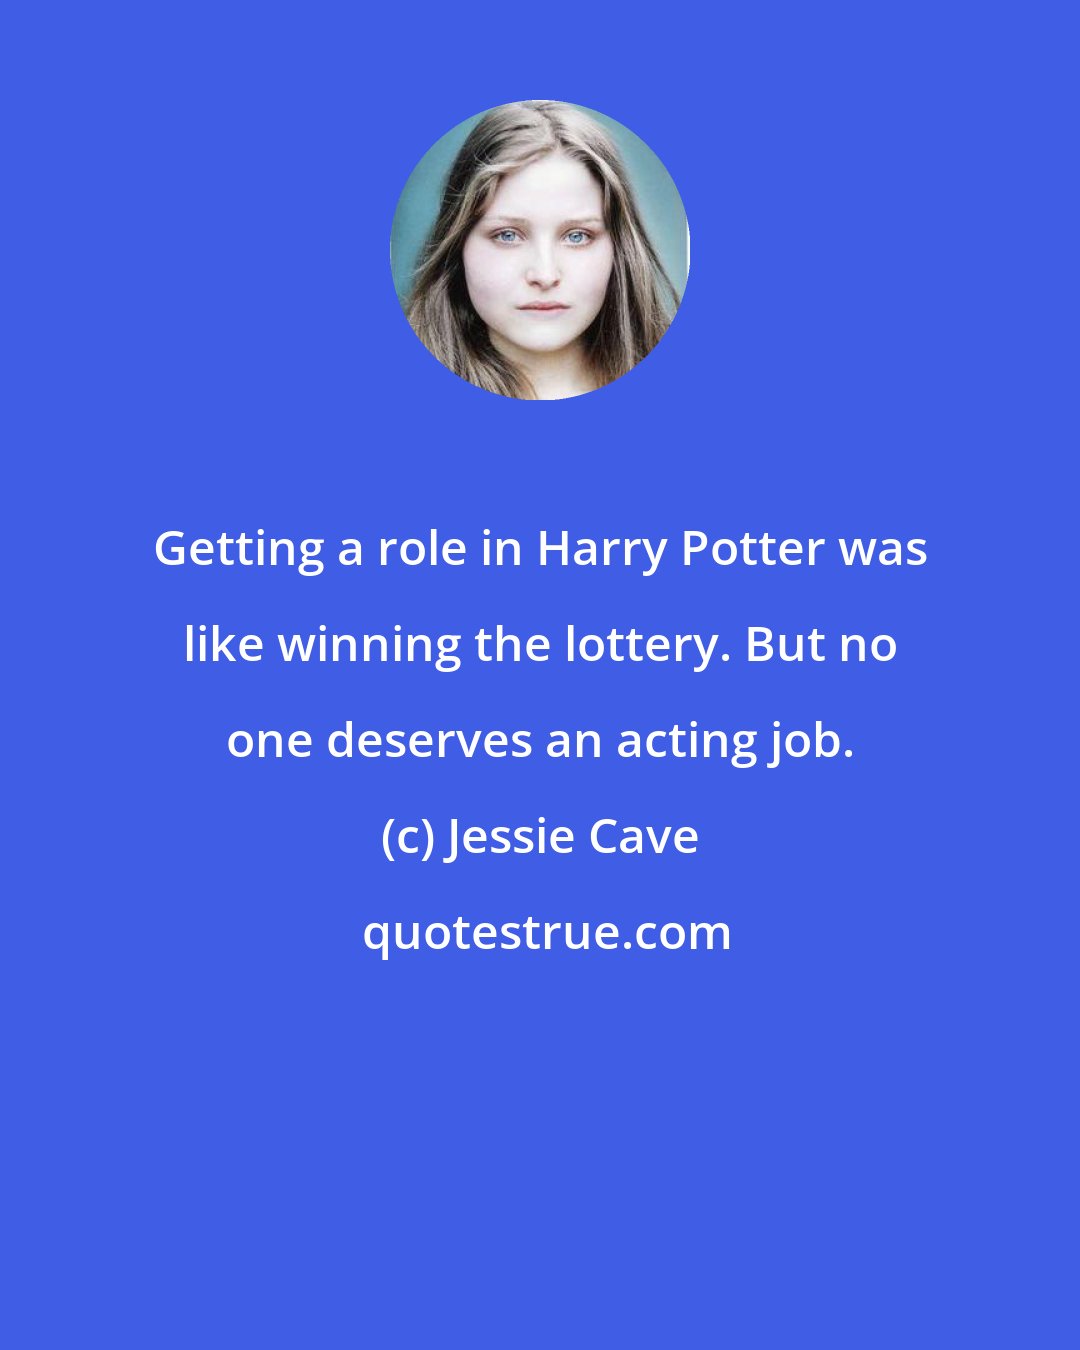 Jessie Cave: Getting a role in Harry Potter was like winning the lottery. But no one deserves an acting job.